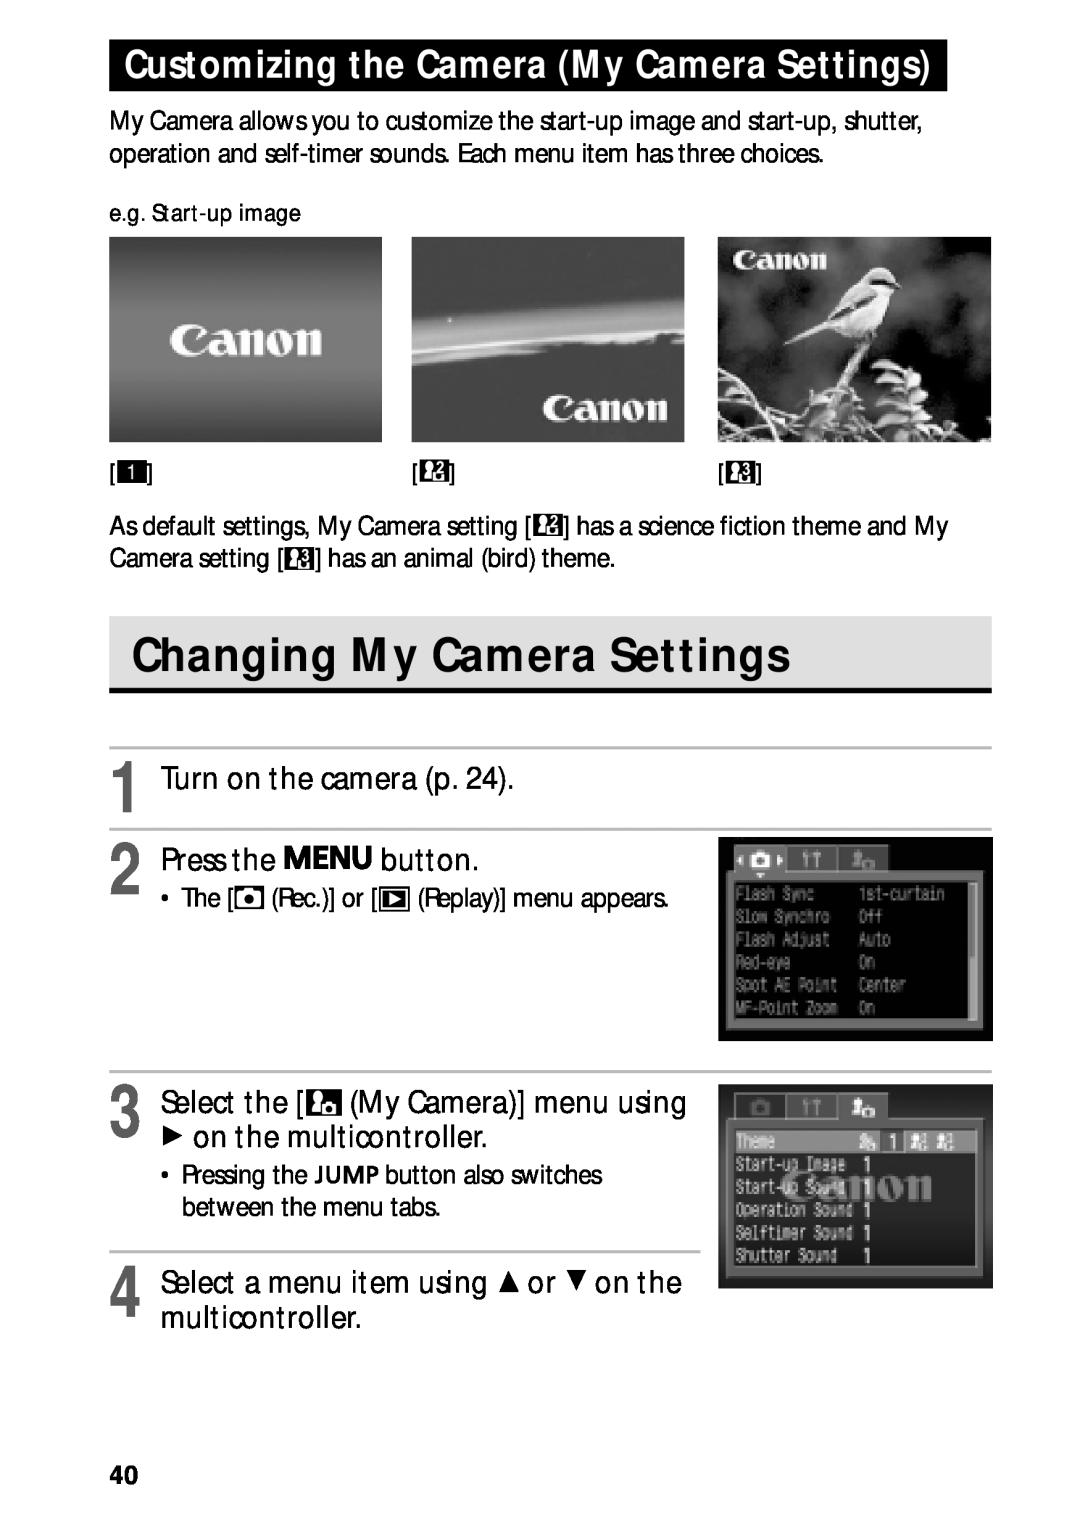 Canon PowerShot S45 Changing My Camera Settings, Customizing the Camera My Camera Settings, Turn on the camera p, button 